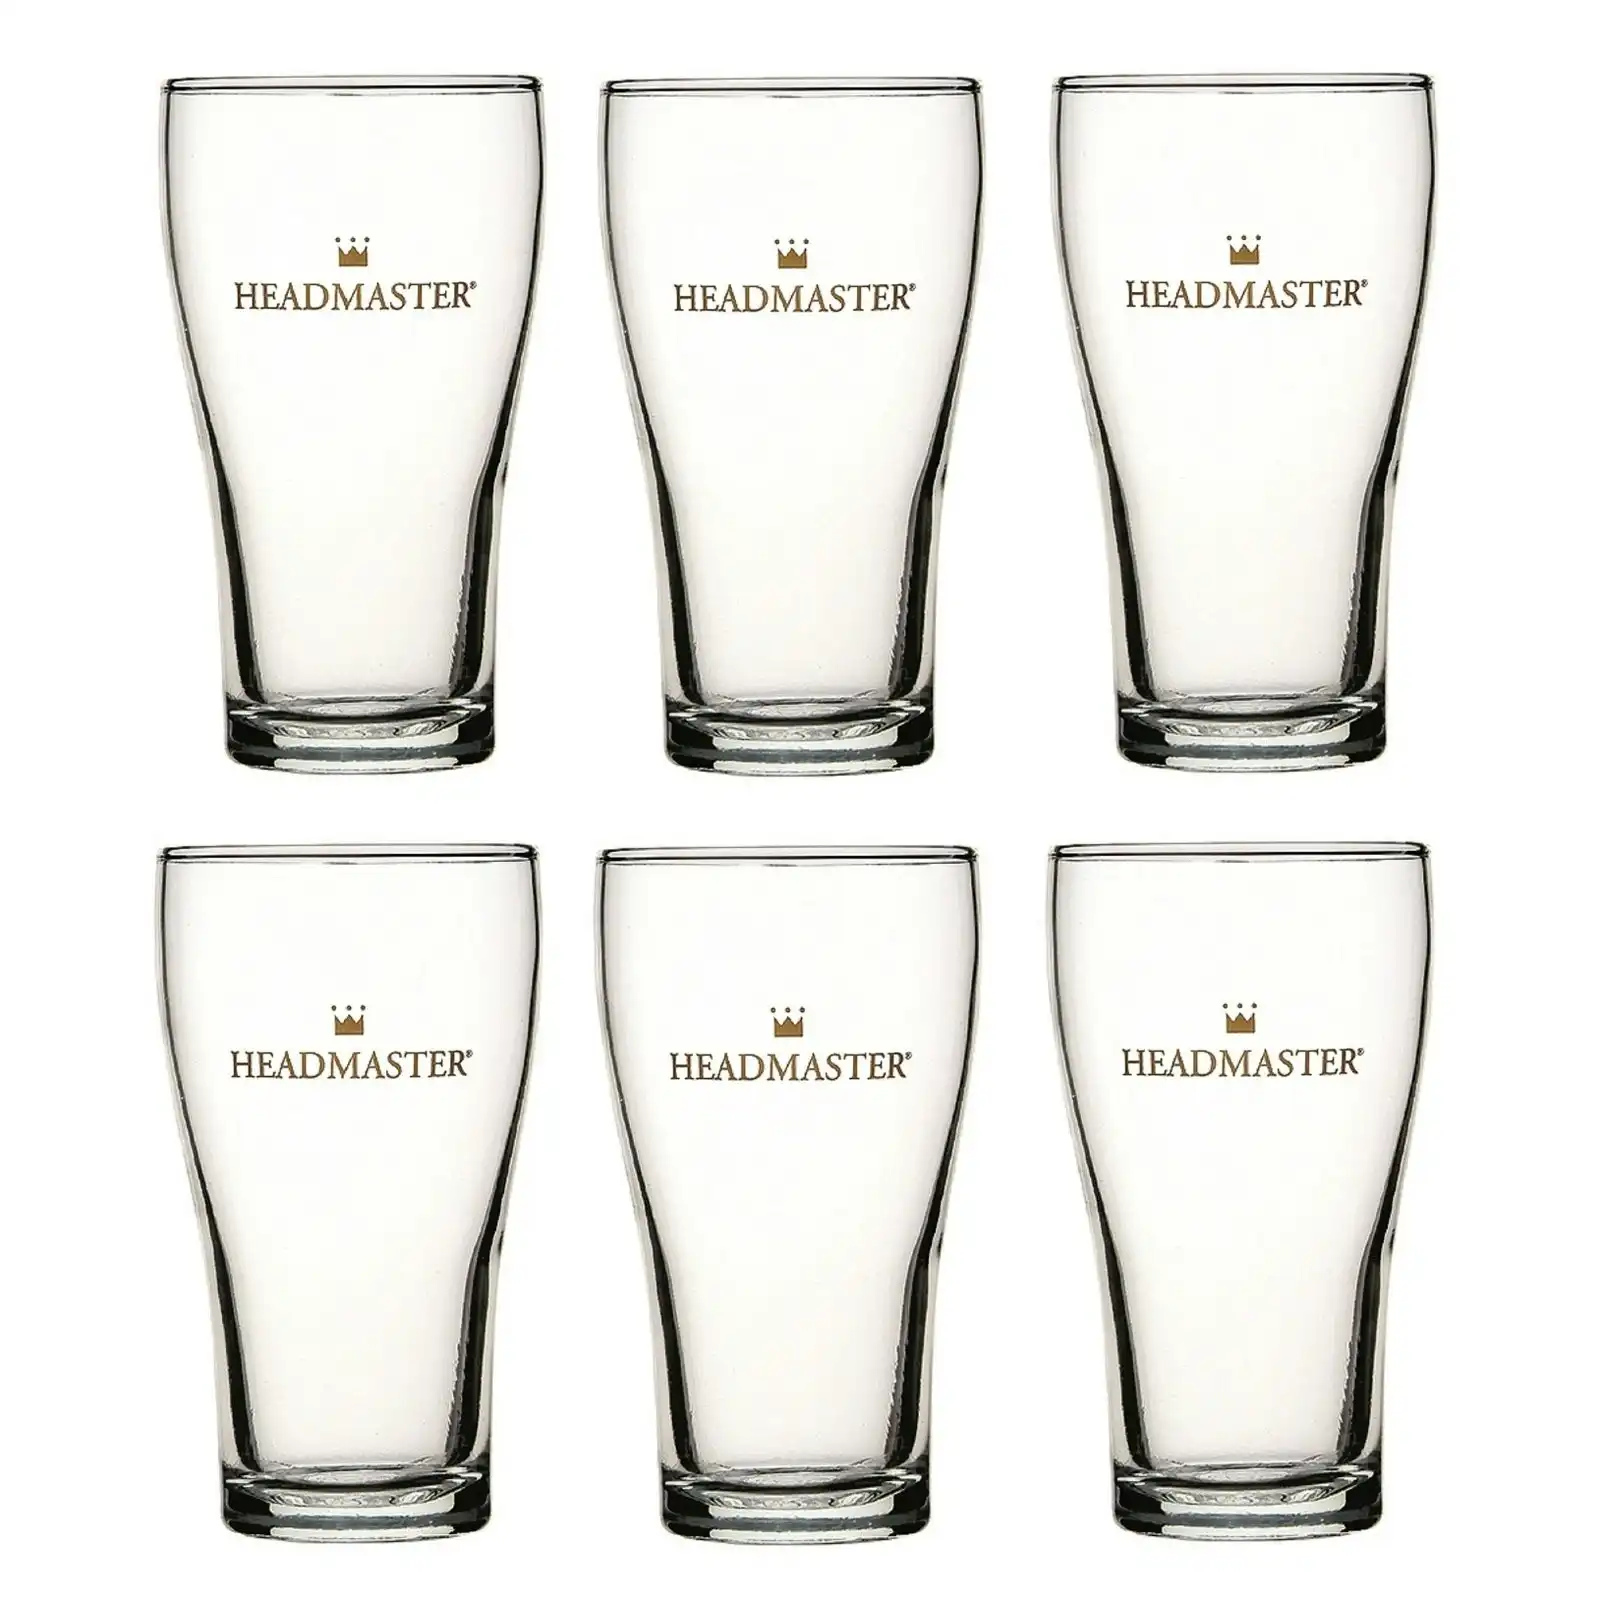 CROWN NUCLEATED Headmaster BEER CONICAL GLASSES 425ml - Set of 6